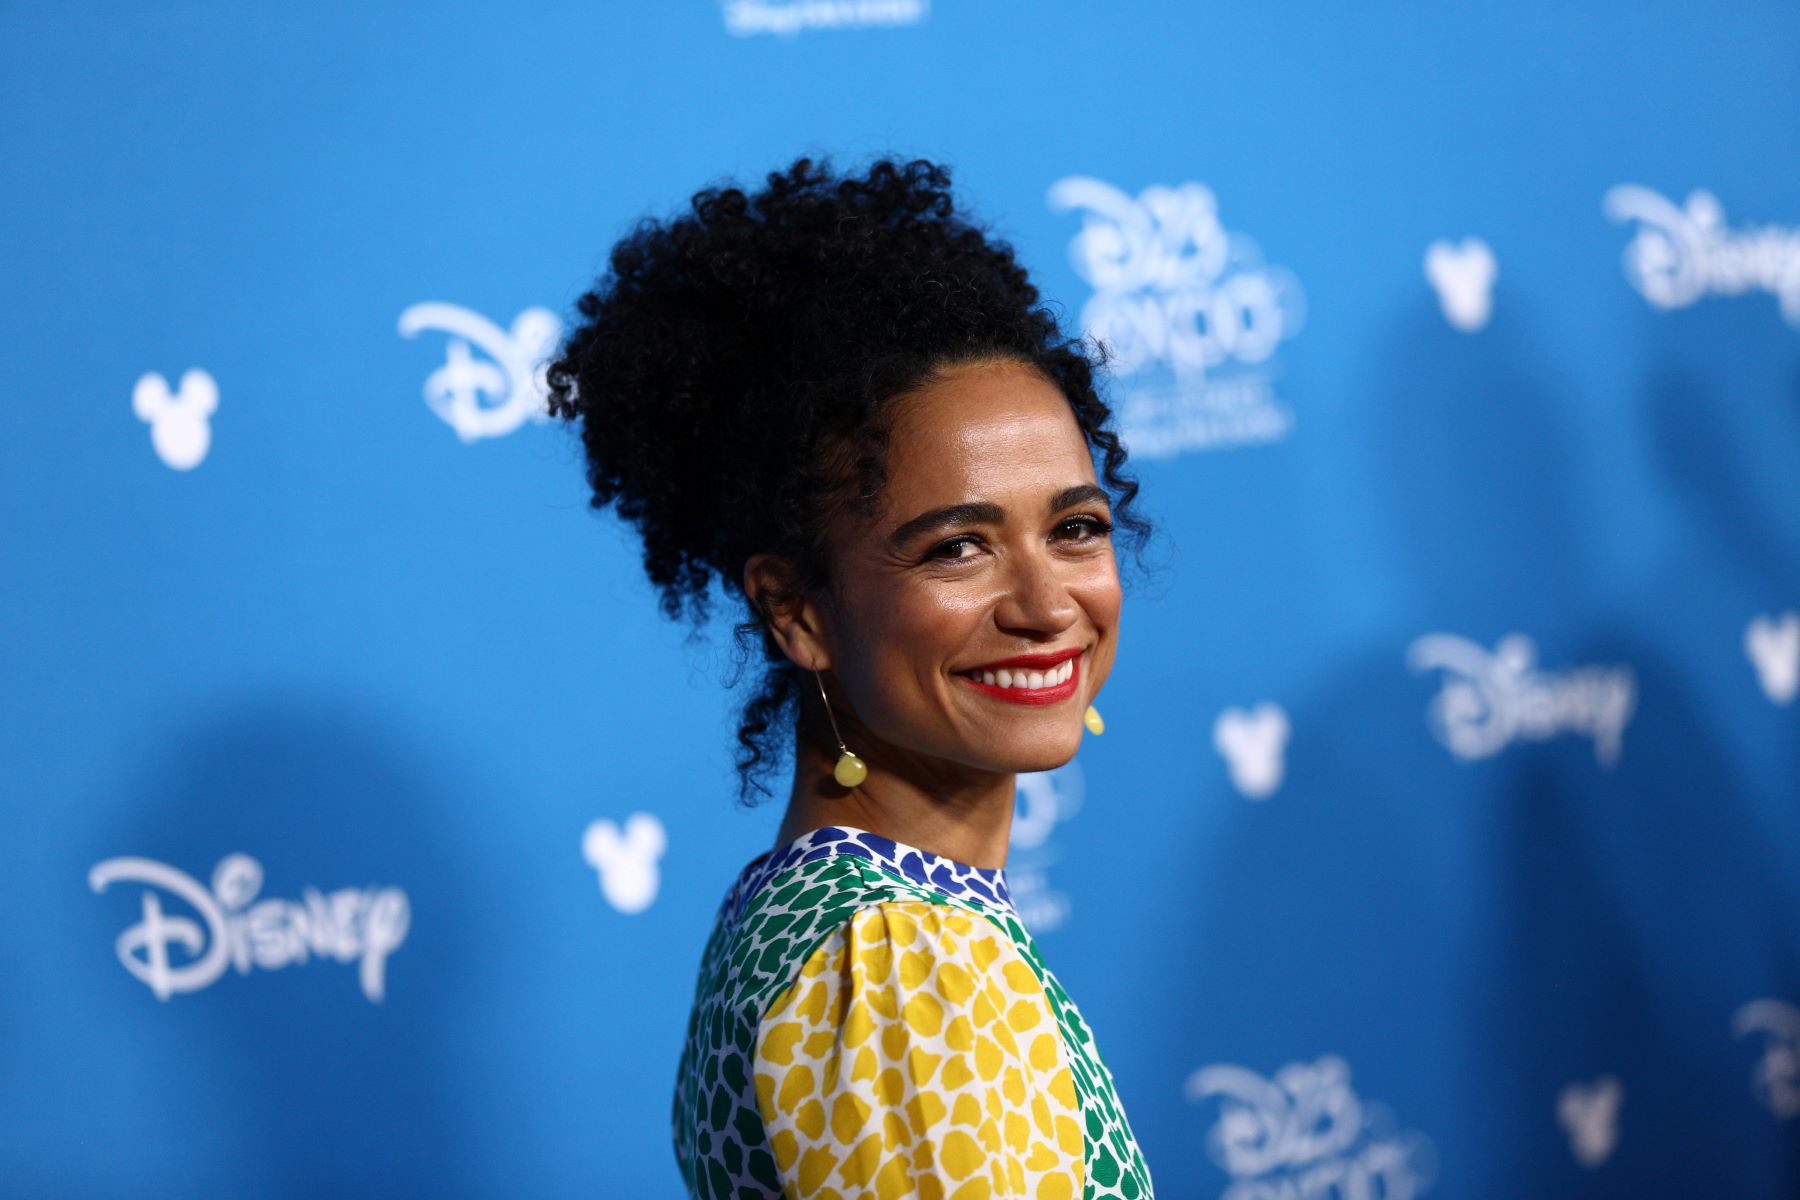 Marvel’s ‘Eternals’ Star Lauren Ridloff Hilariously Reveals That a Mysterious ‘Man in a Trench Coat’ Delivered Her Scripts